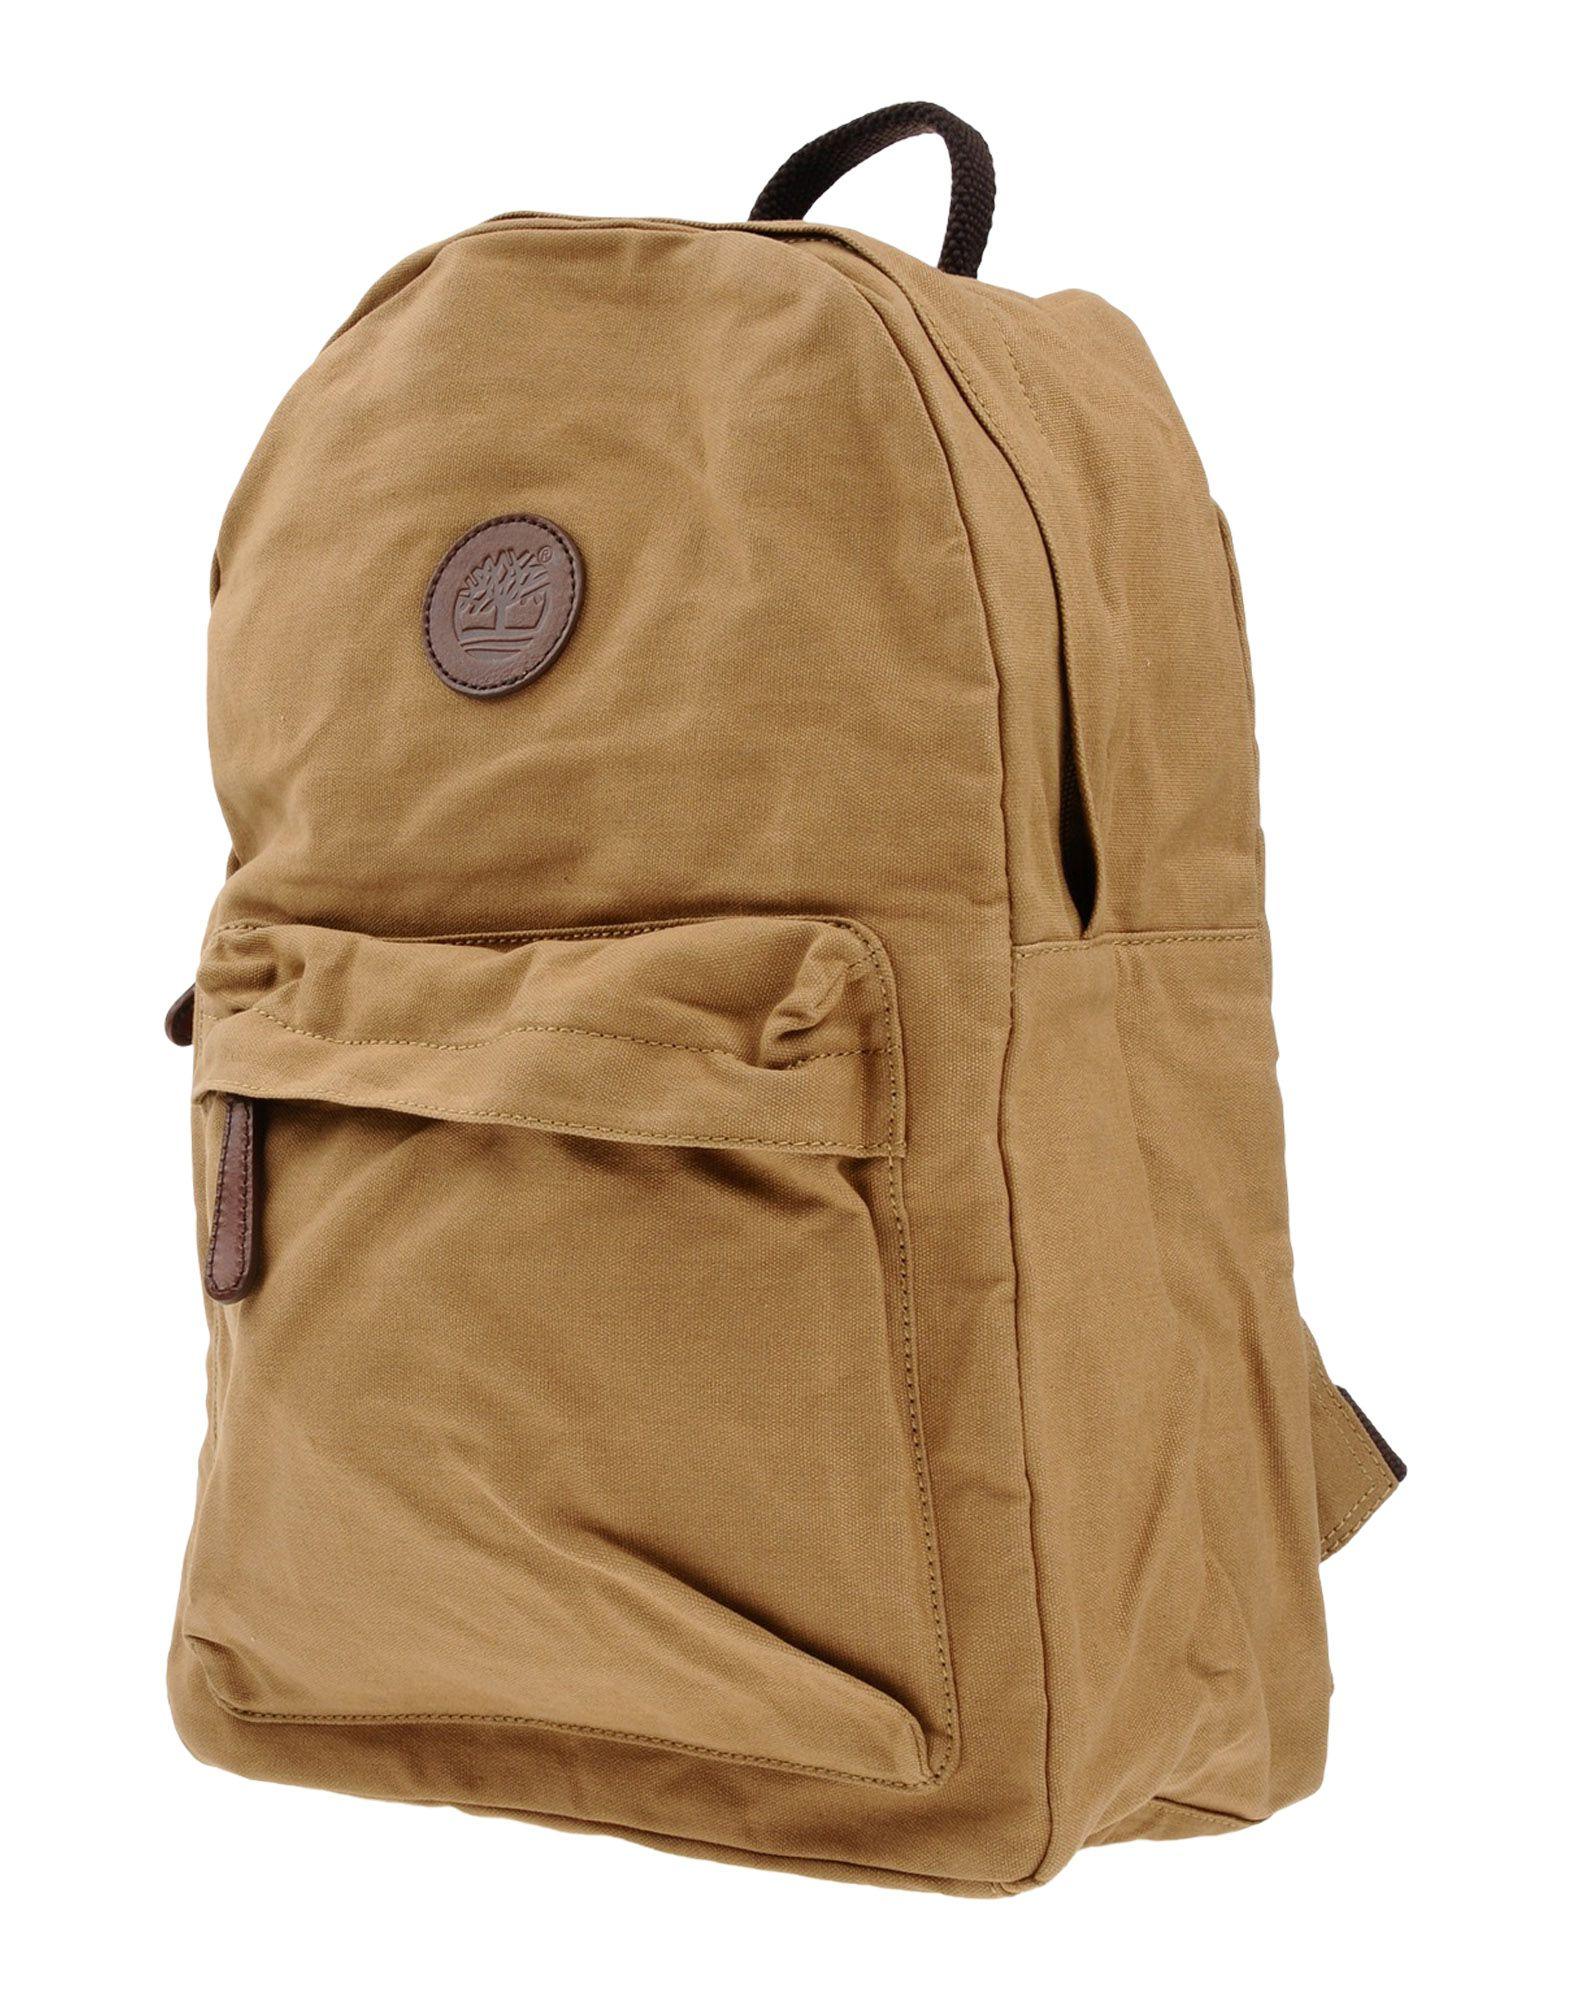 Timberland Canvas Backpacks & Bum Bags in Beige (Natural) for Men - Lyst